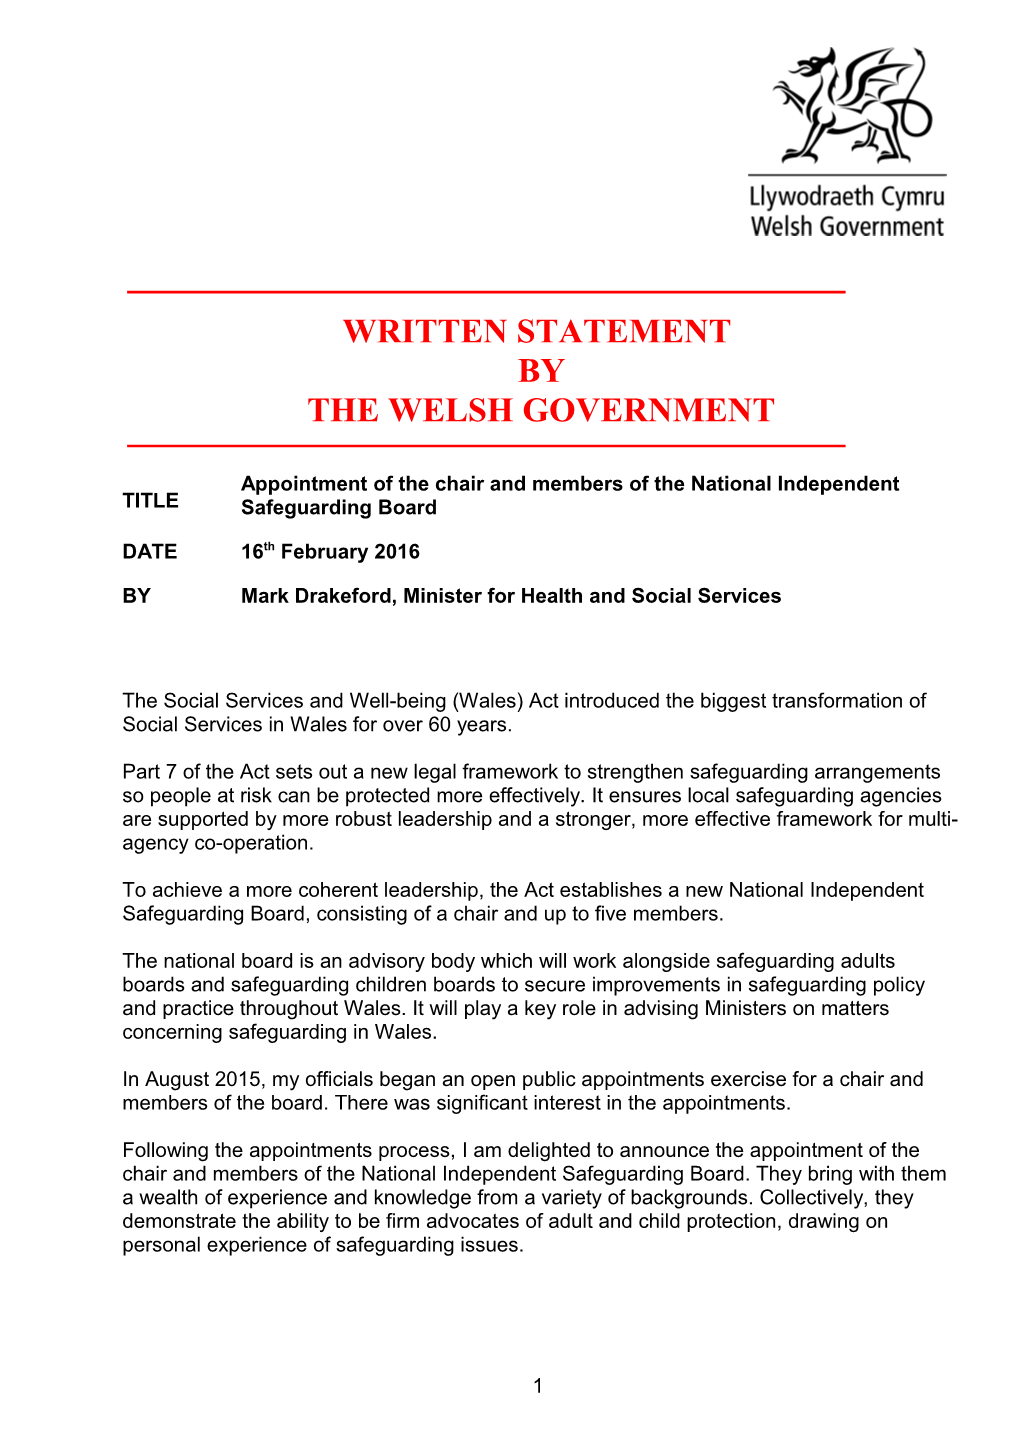 Appointment of the Chair and Members of the National Independent Safeguarding Board